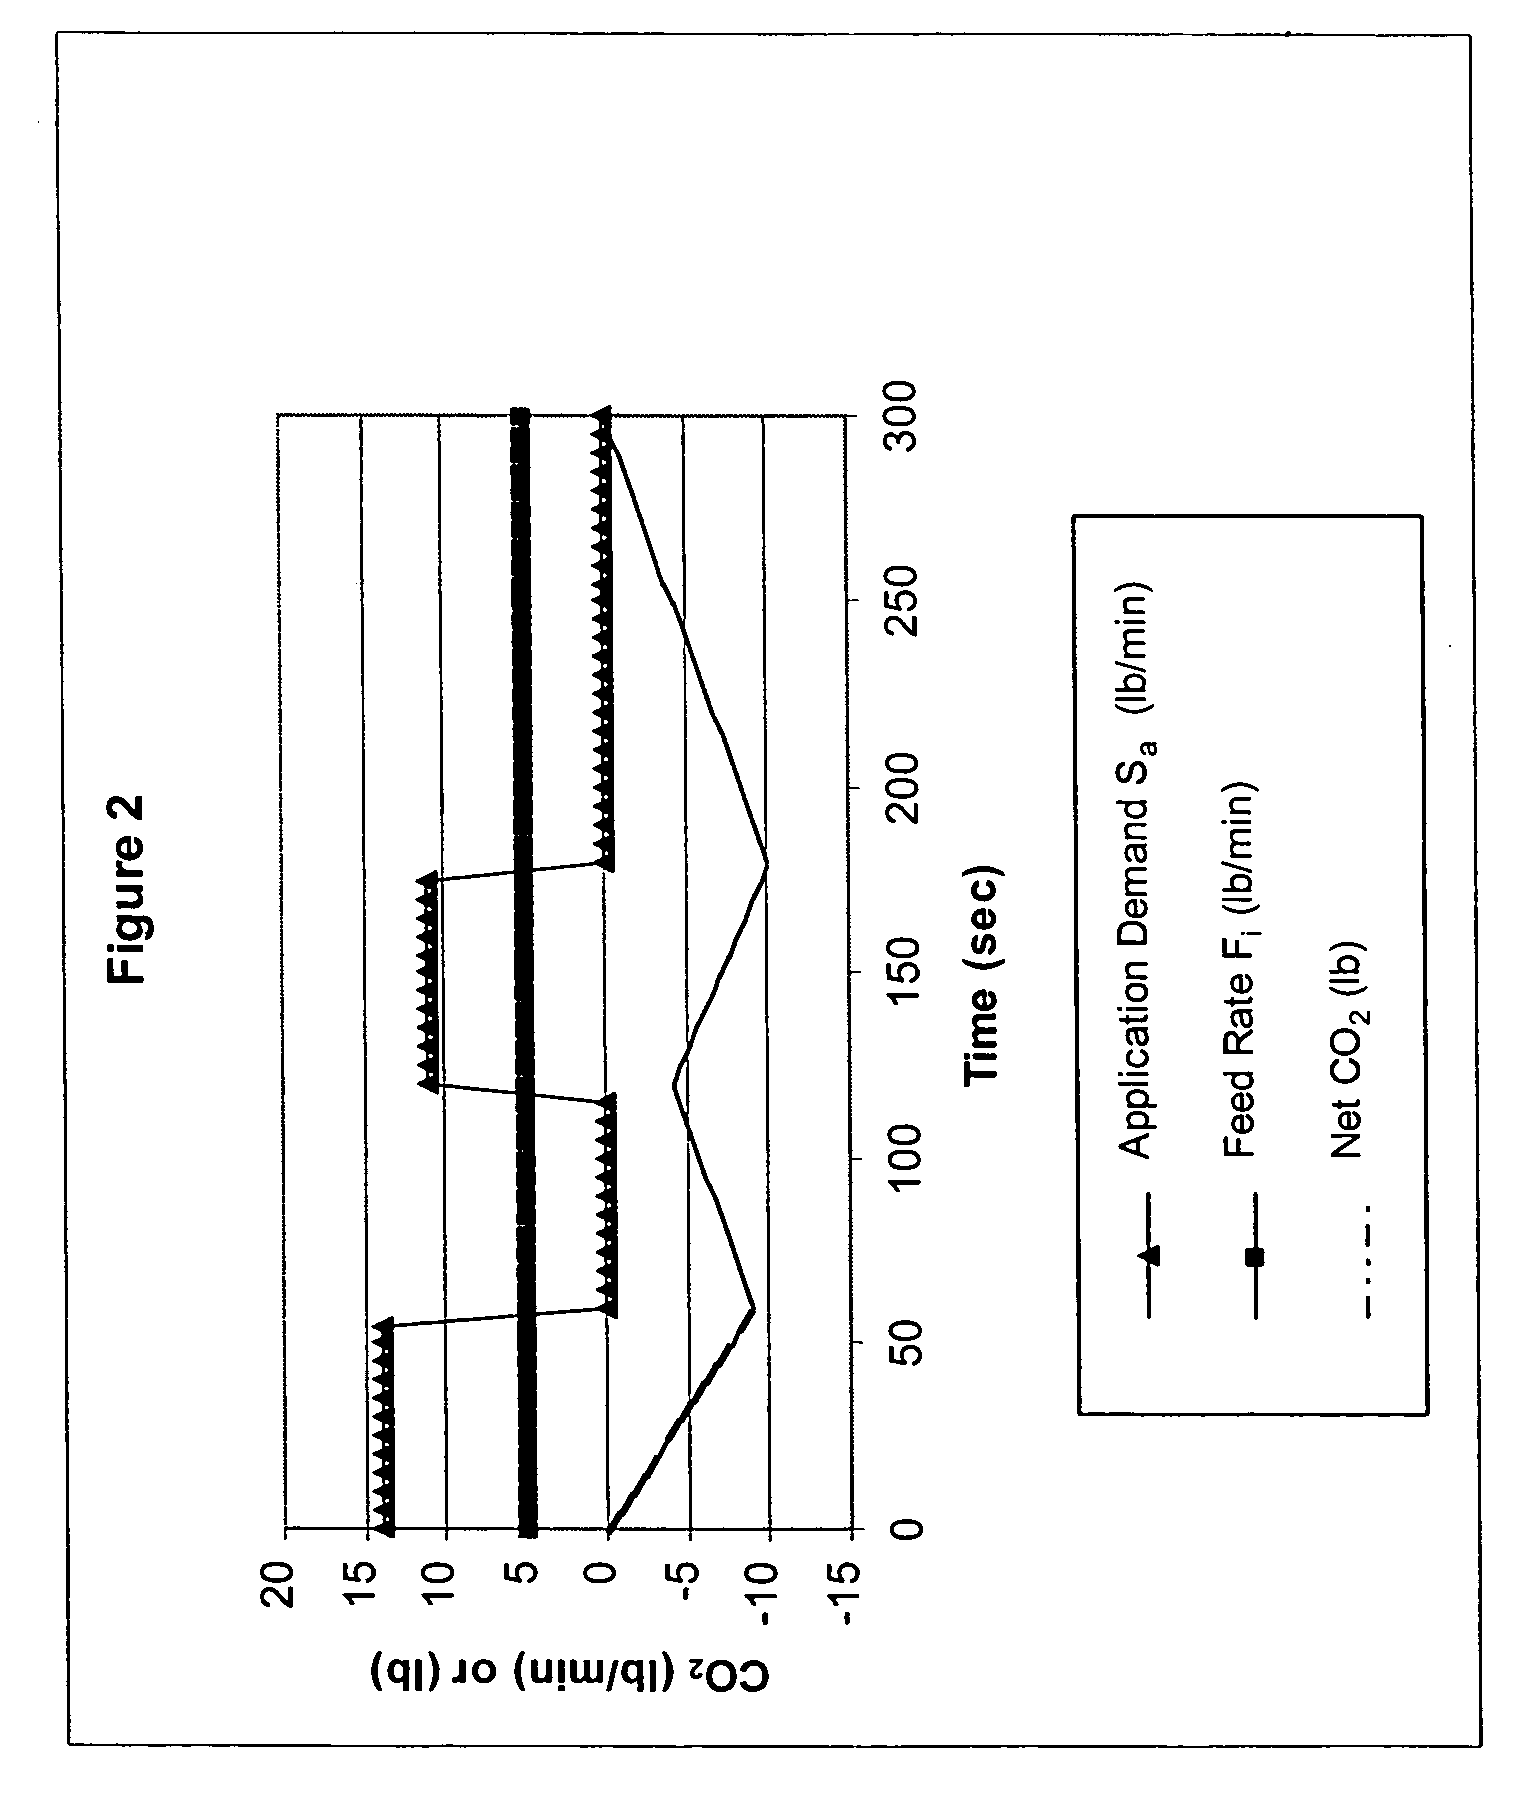 Method and system for supplying carbon dioxide to a semiconductor tool having variable flow requirement